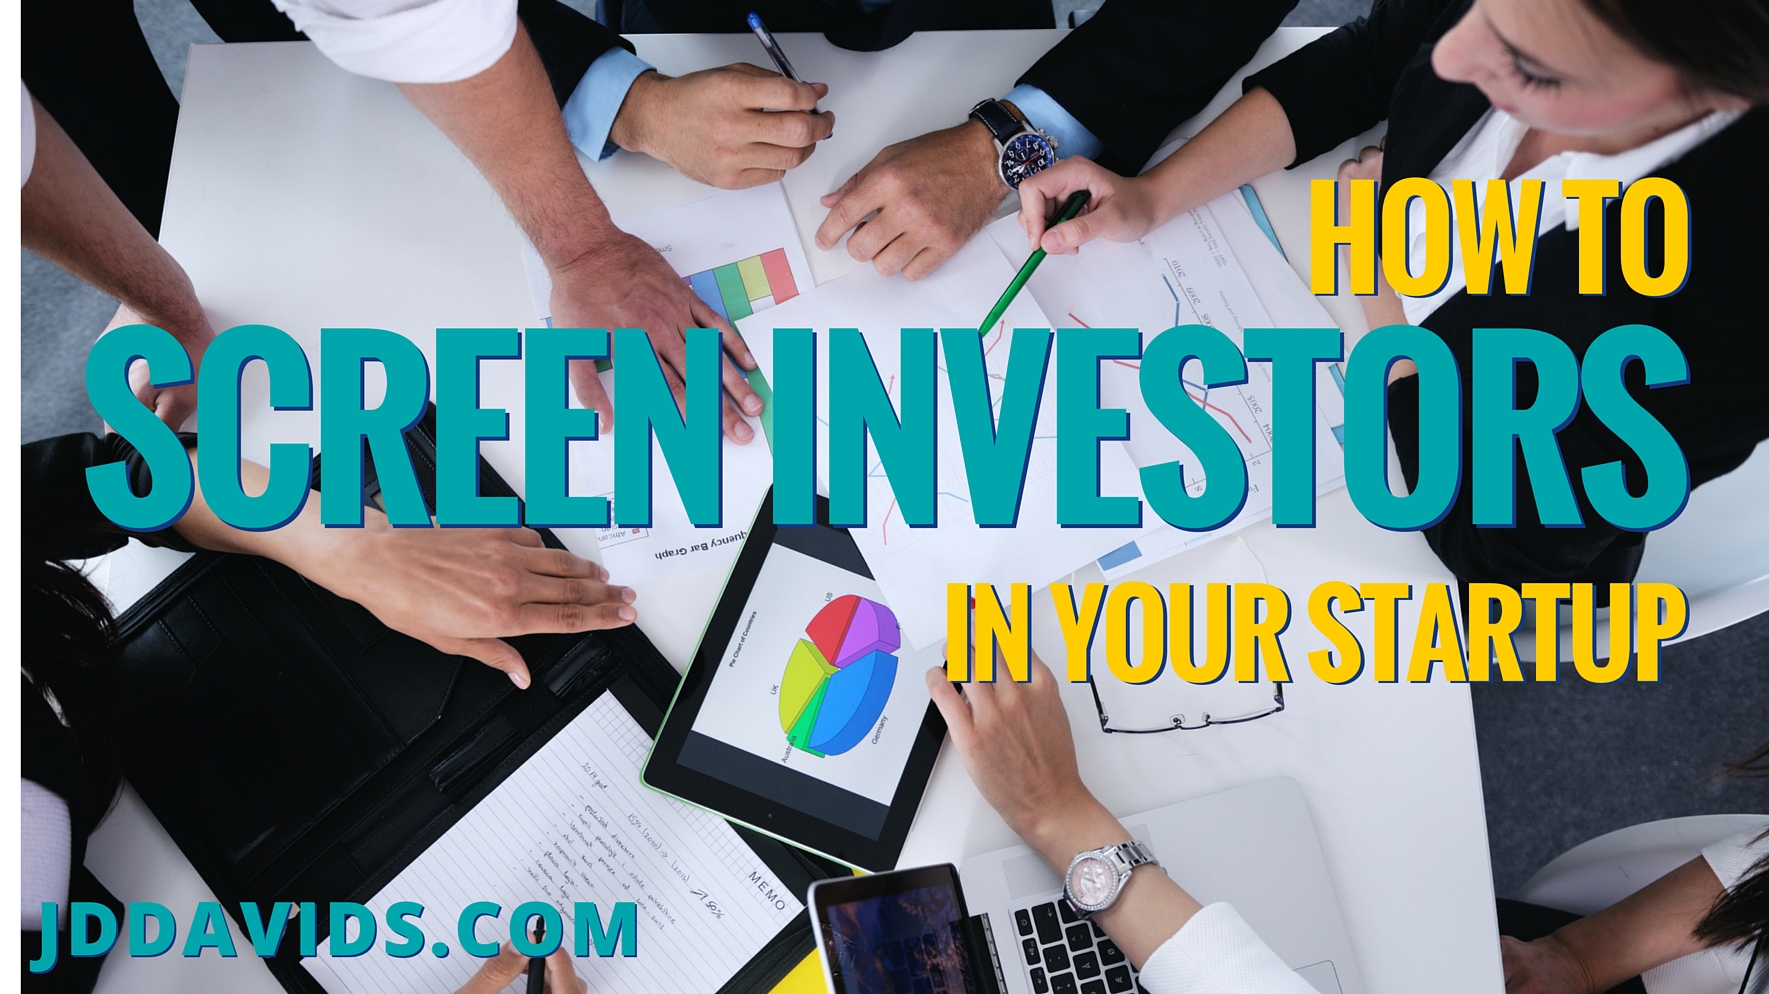 How to Screen Investors in Your Startup